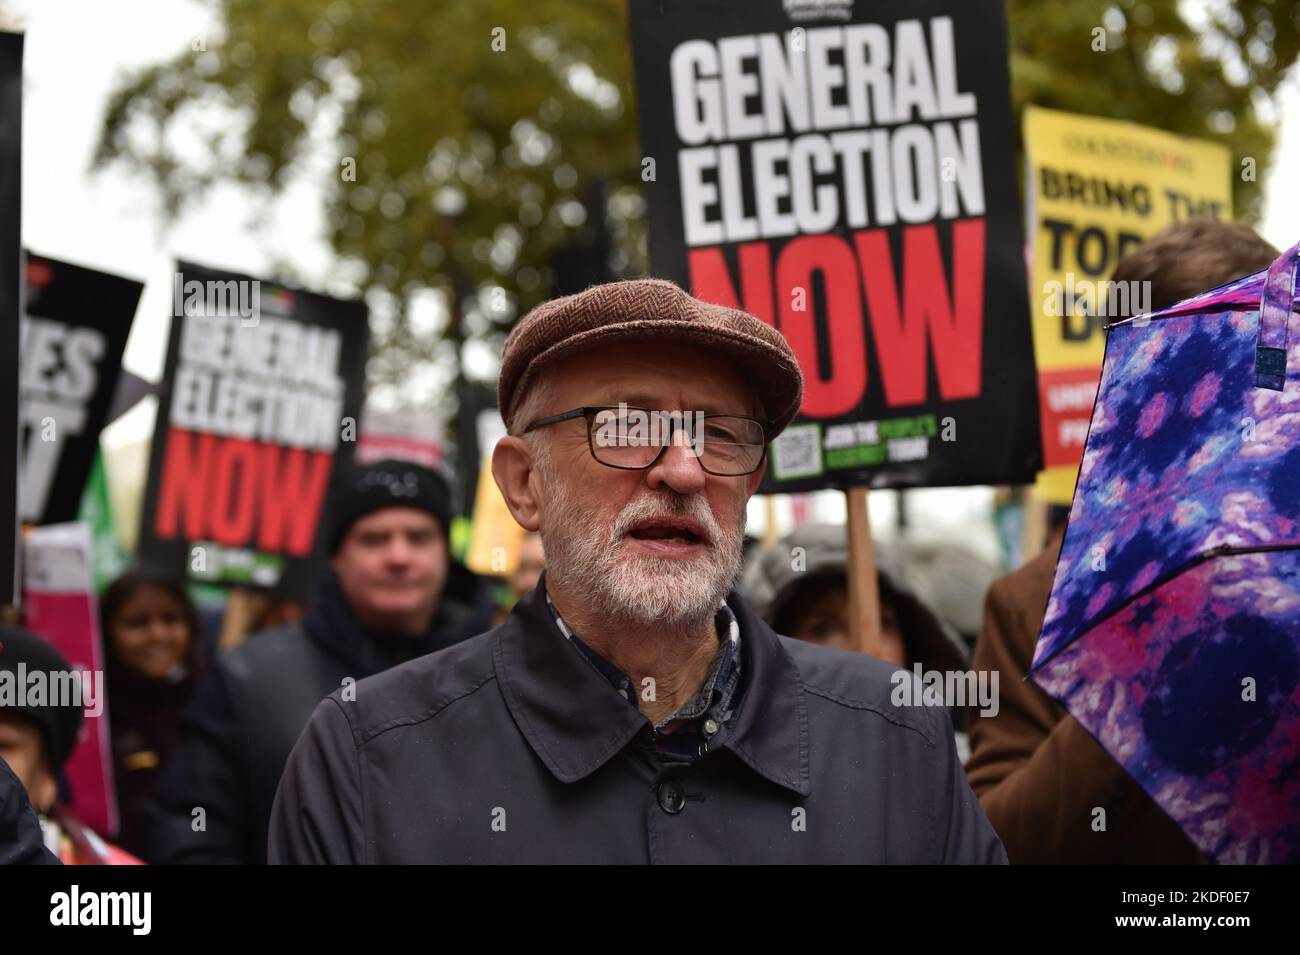 MP Jeremy Corbyn seen at the rally. Anti government and anti-tories protesters gathered in Embankment and marched through Westminster to demand general election. Stock Photo